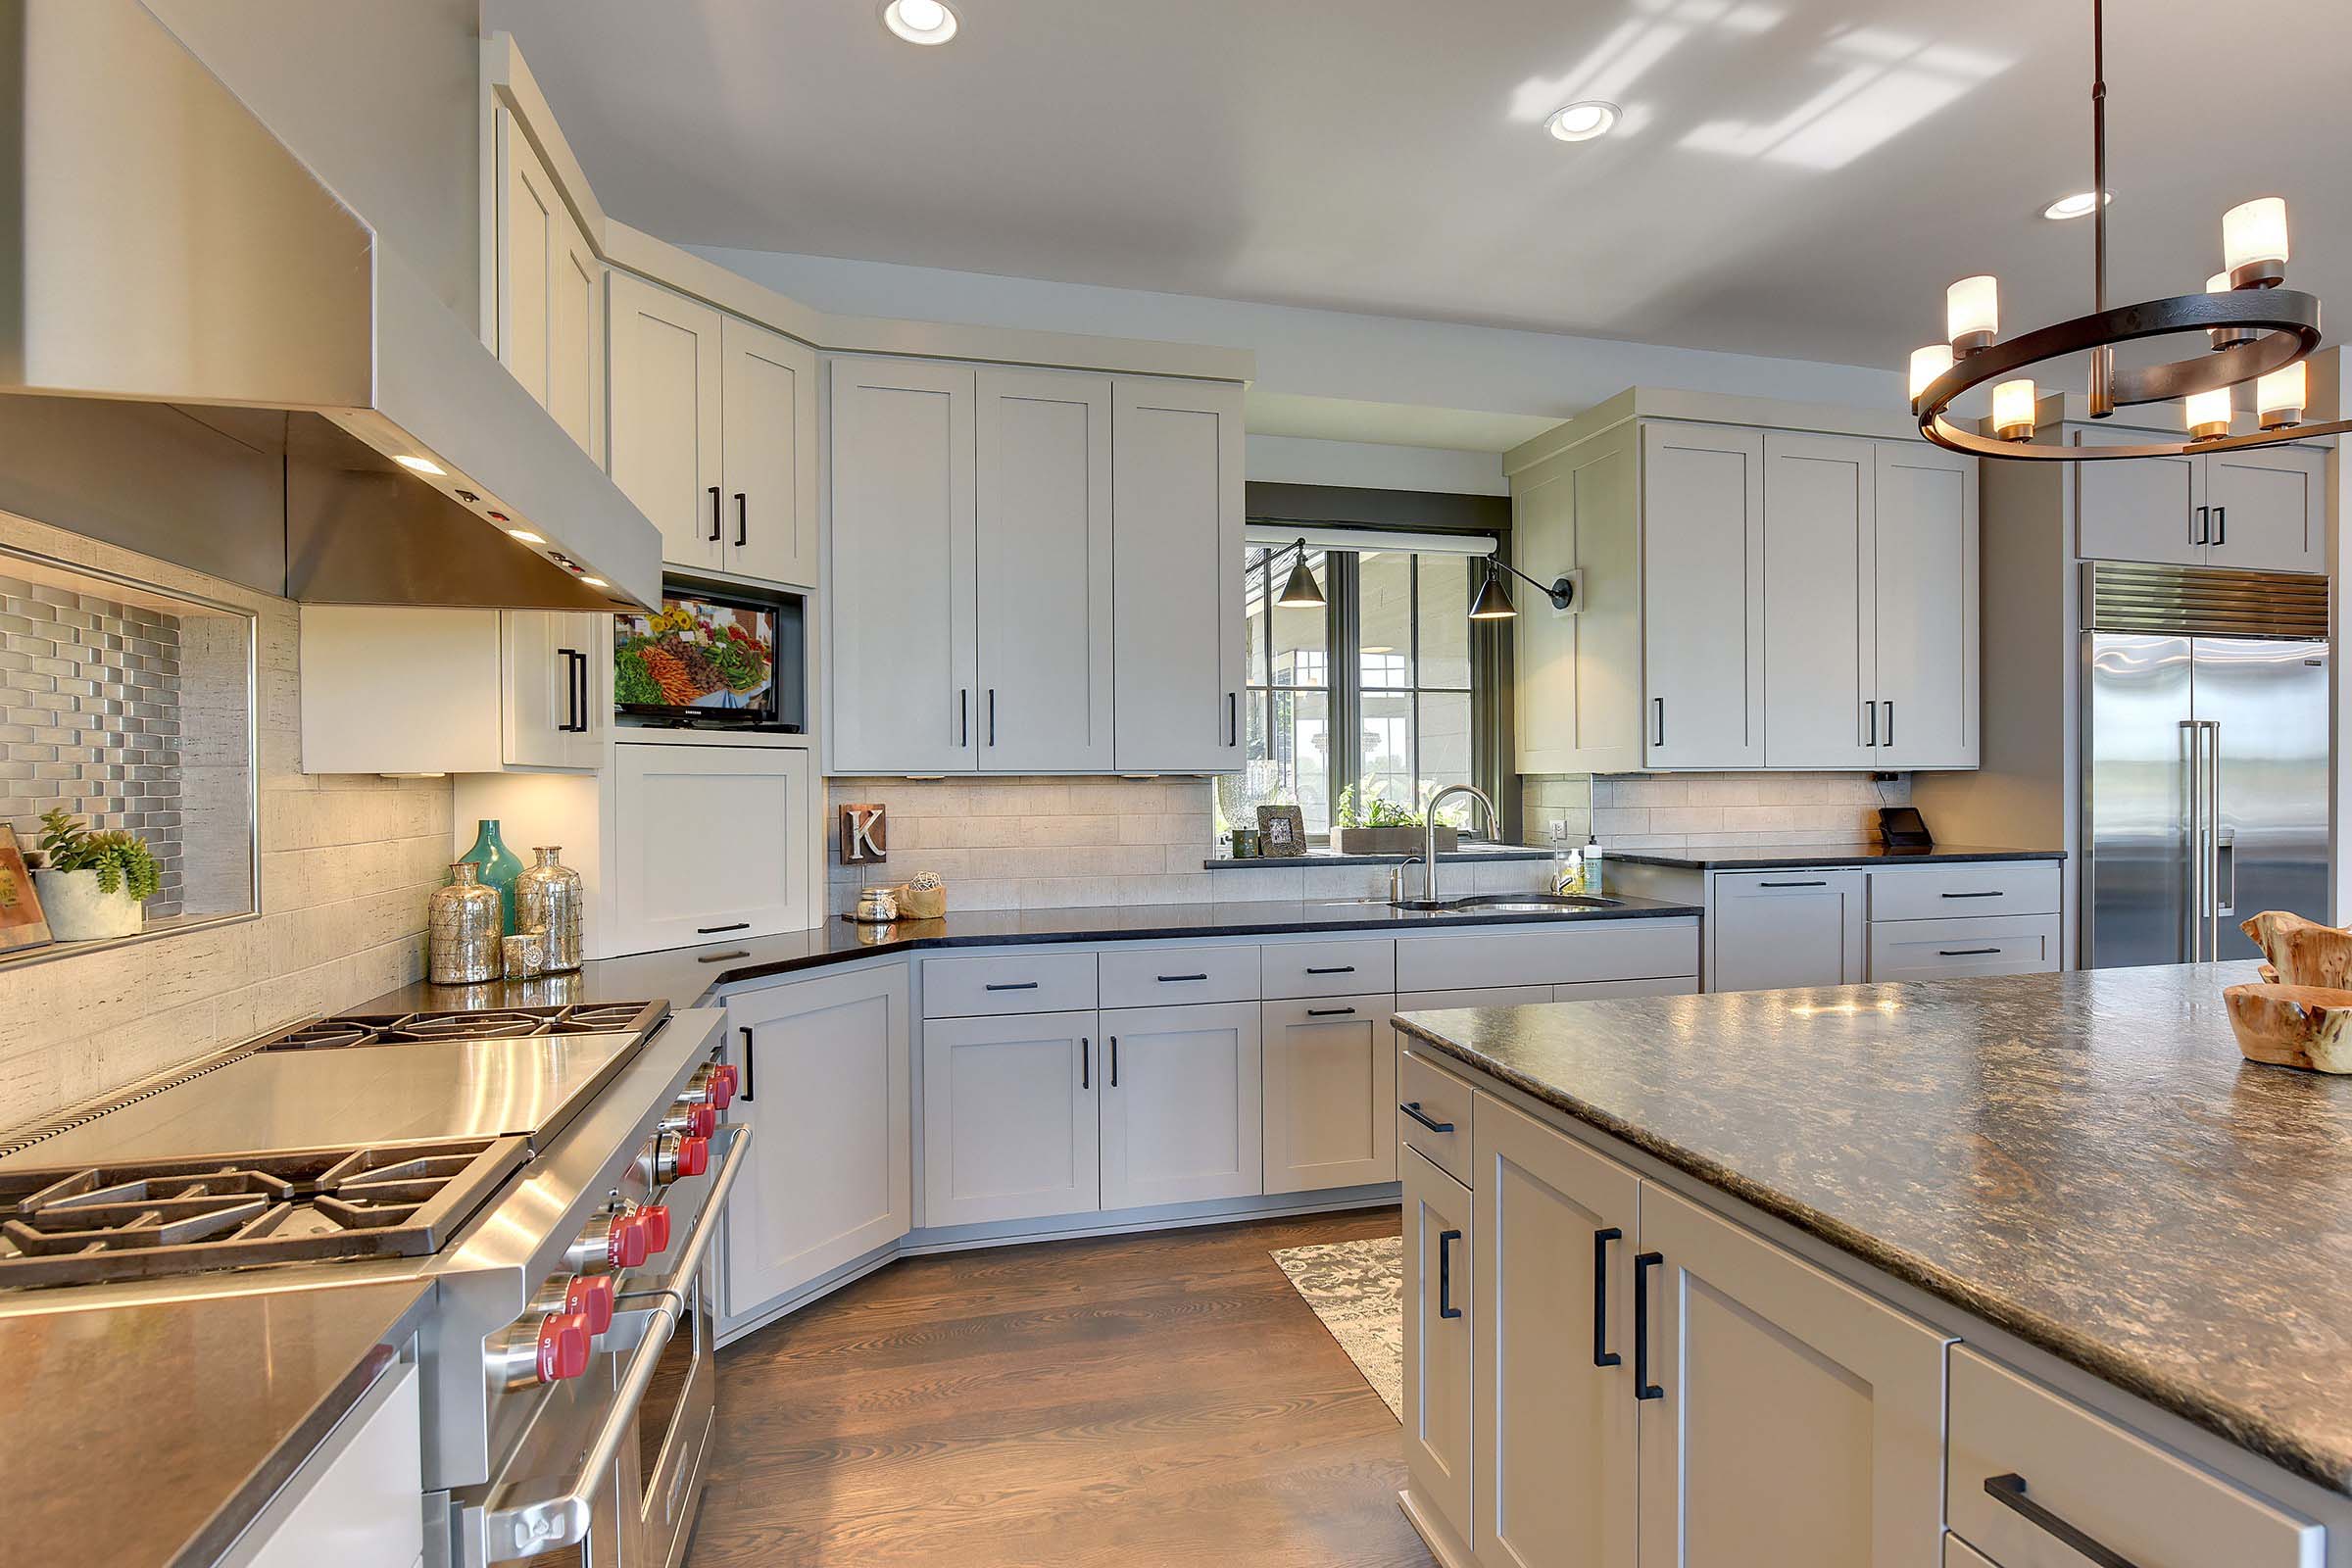 Kitchens portfolio with white cabinets and granite counter tops.